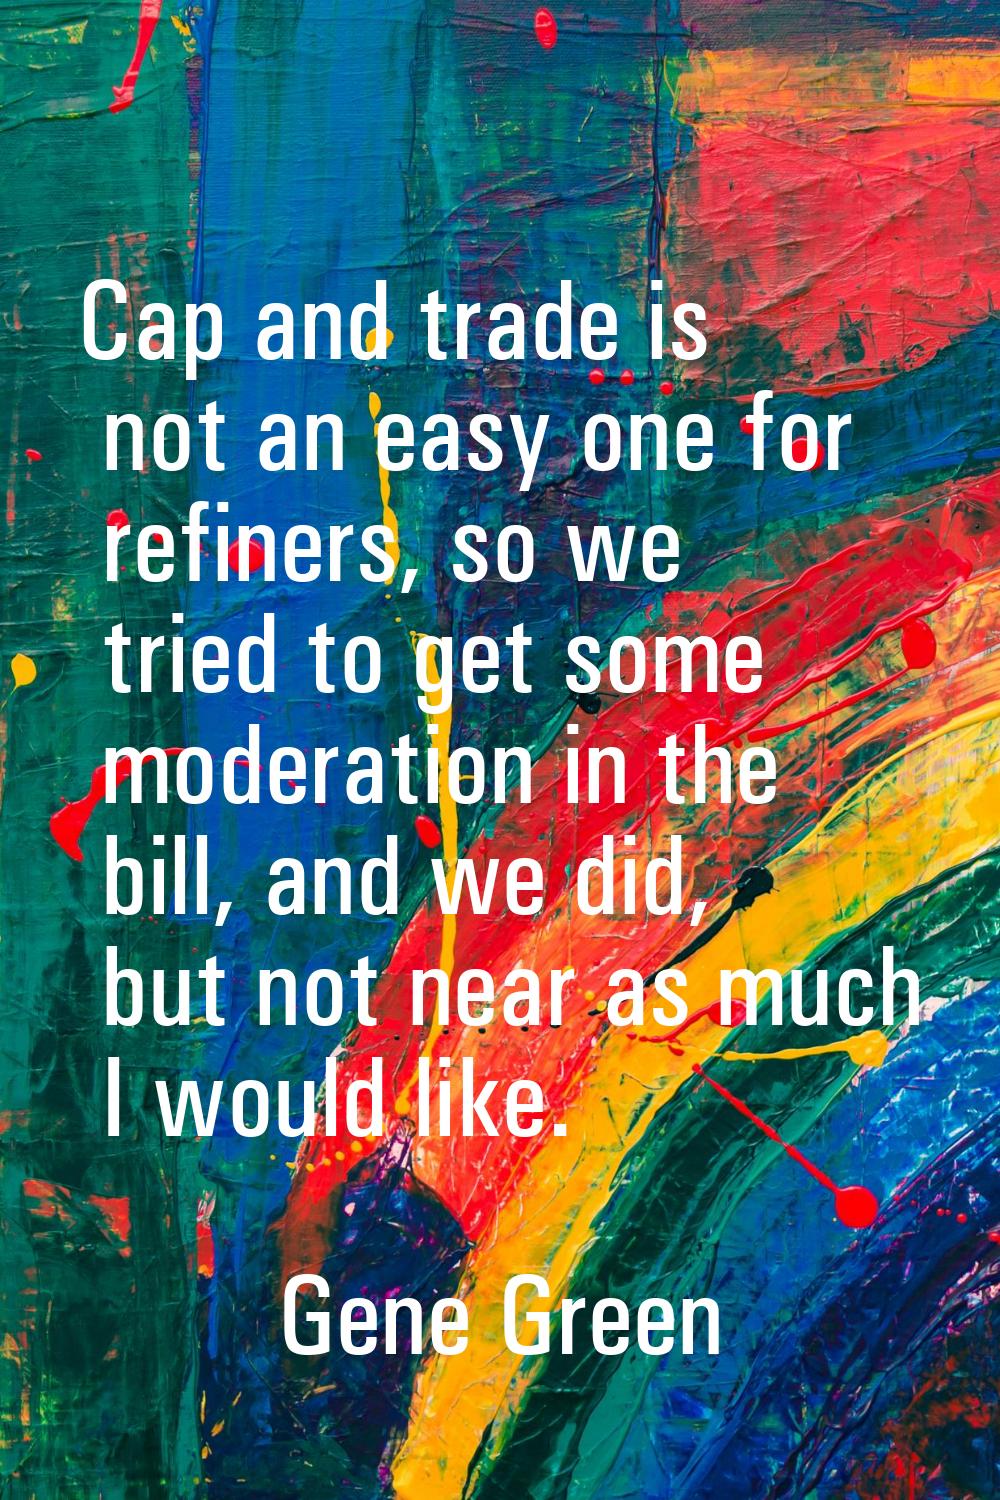 Cap and trade is not an easy one for refiners, so we tried to get some moderation in the bill, and 